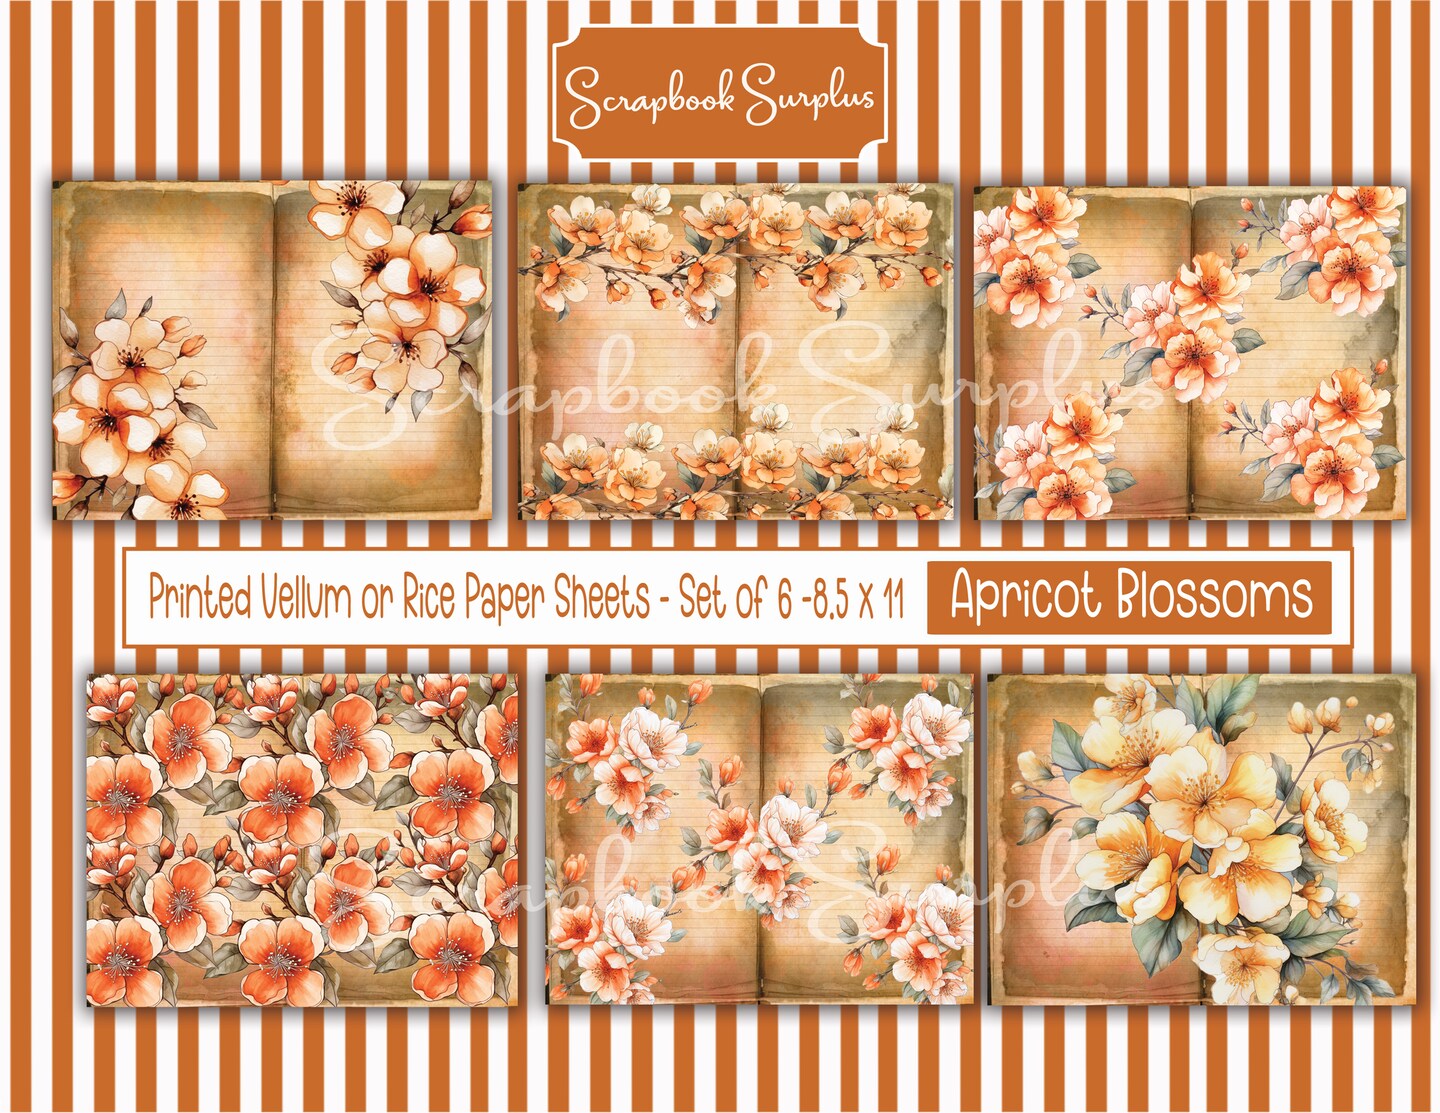 Decoupage Rice Paper Printed Sheets - Set of 6 - 8.5 x 11